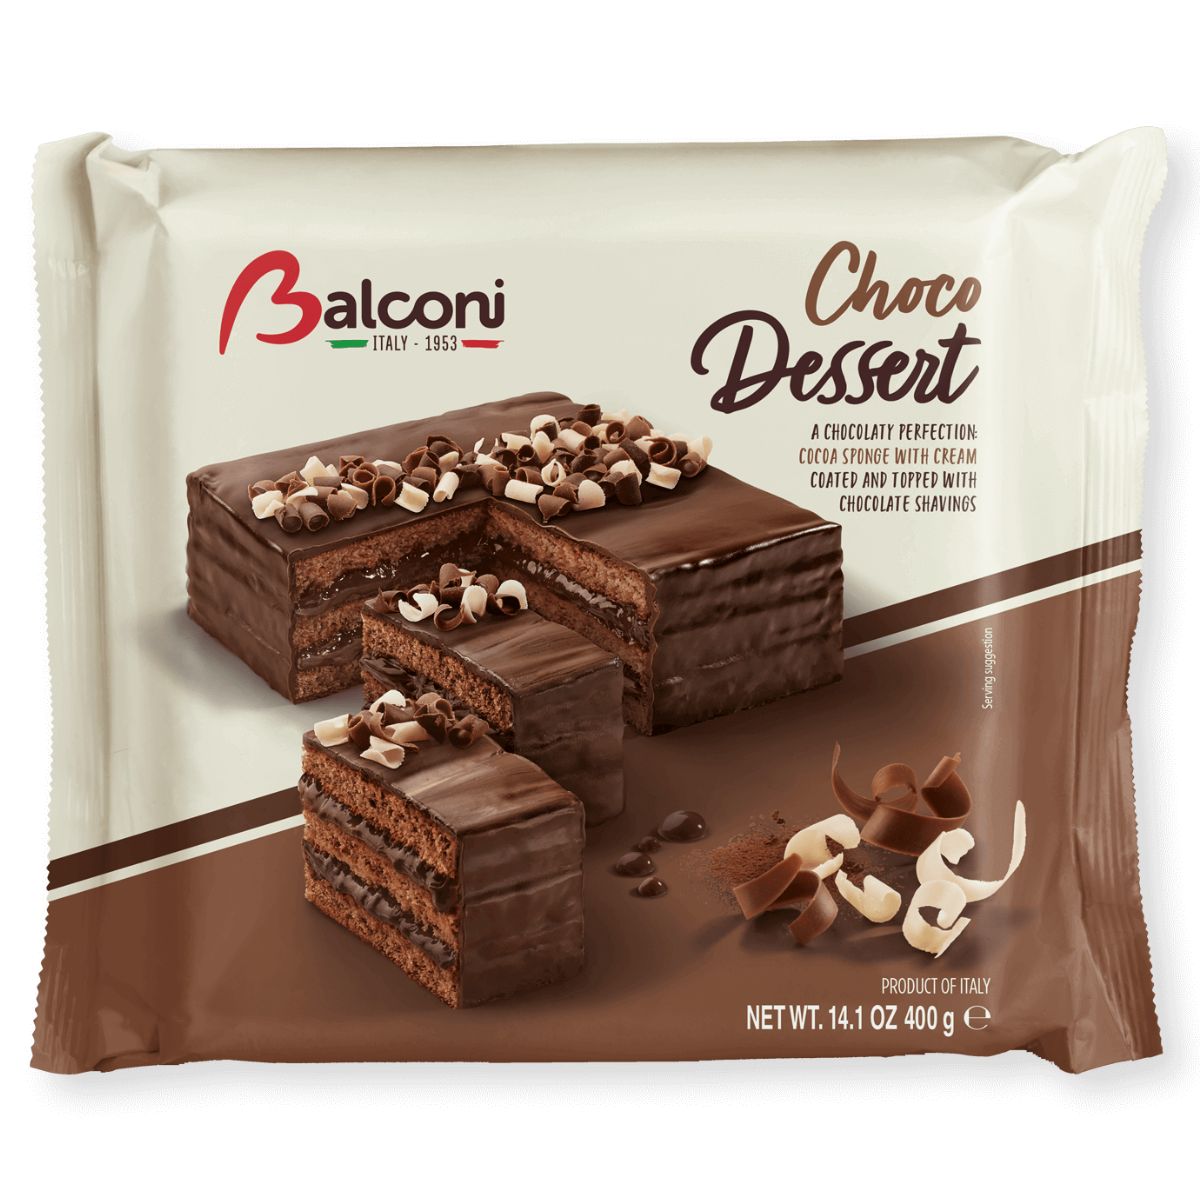 The Balconi Chocolate Dessert - 400g is shown on a white background.